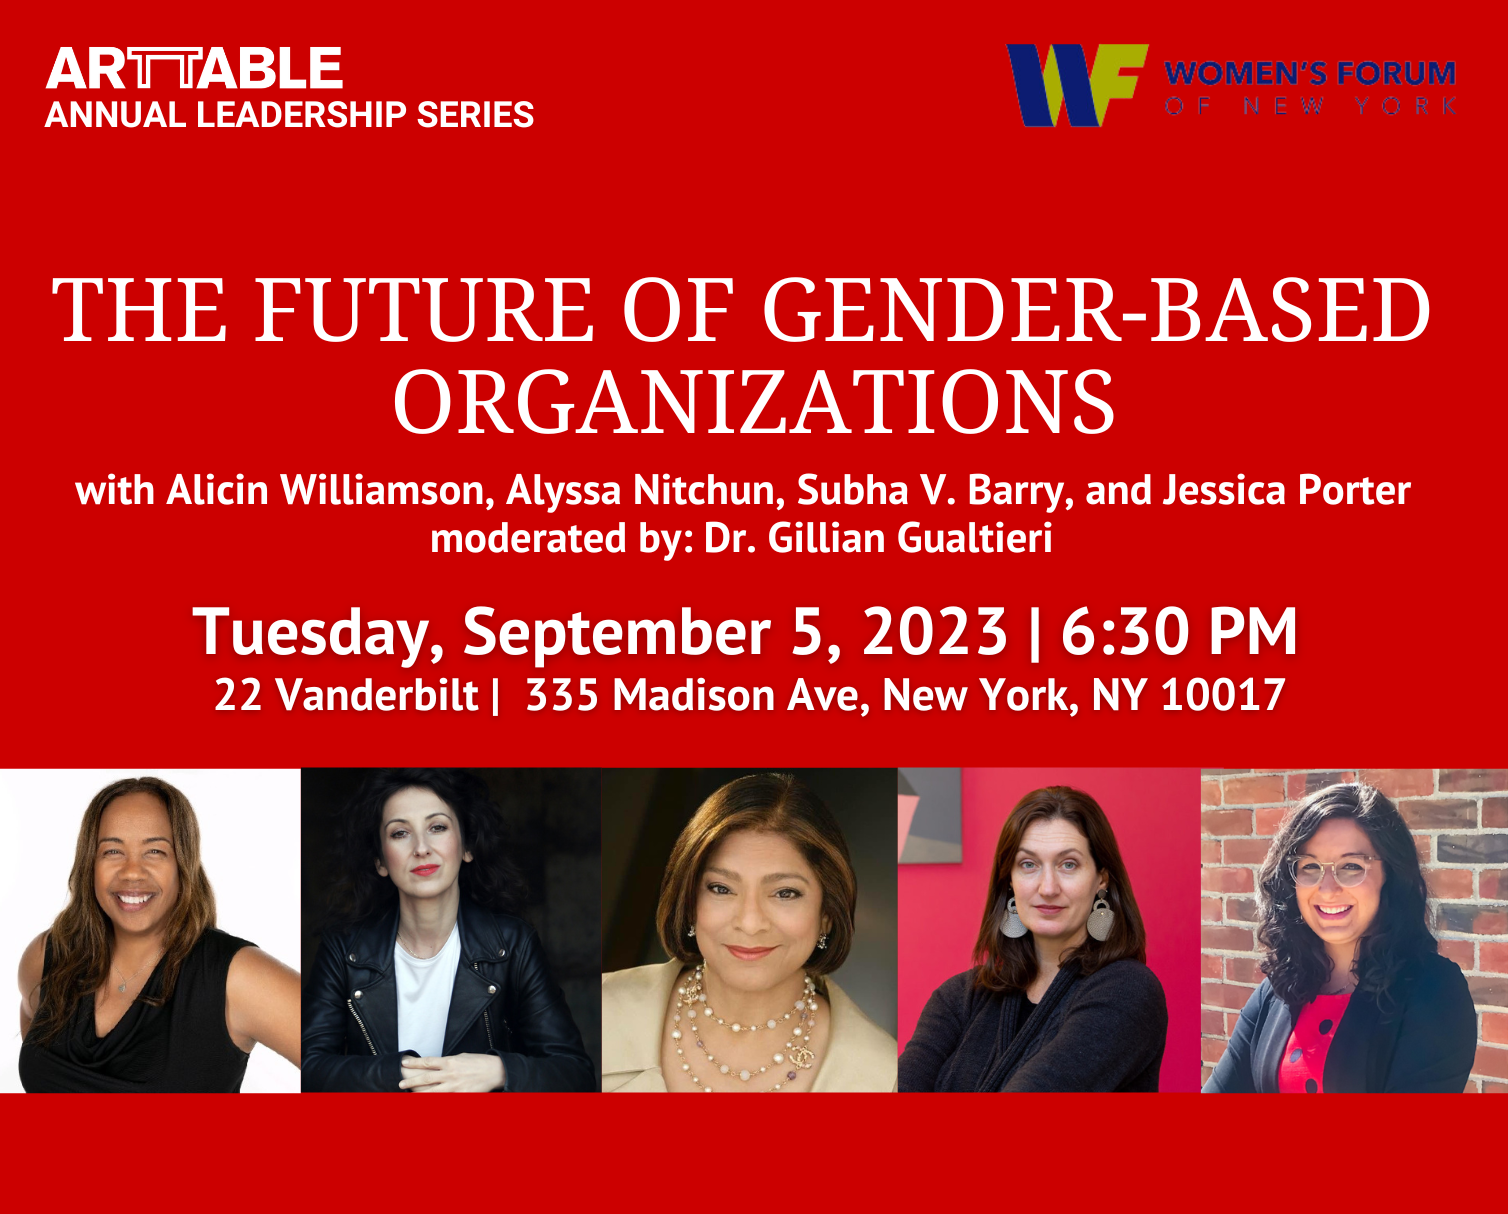 New York | Annual Leadership Series: The Future of Gender-Based Organizations